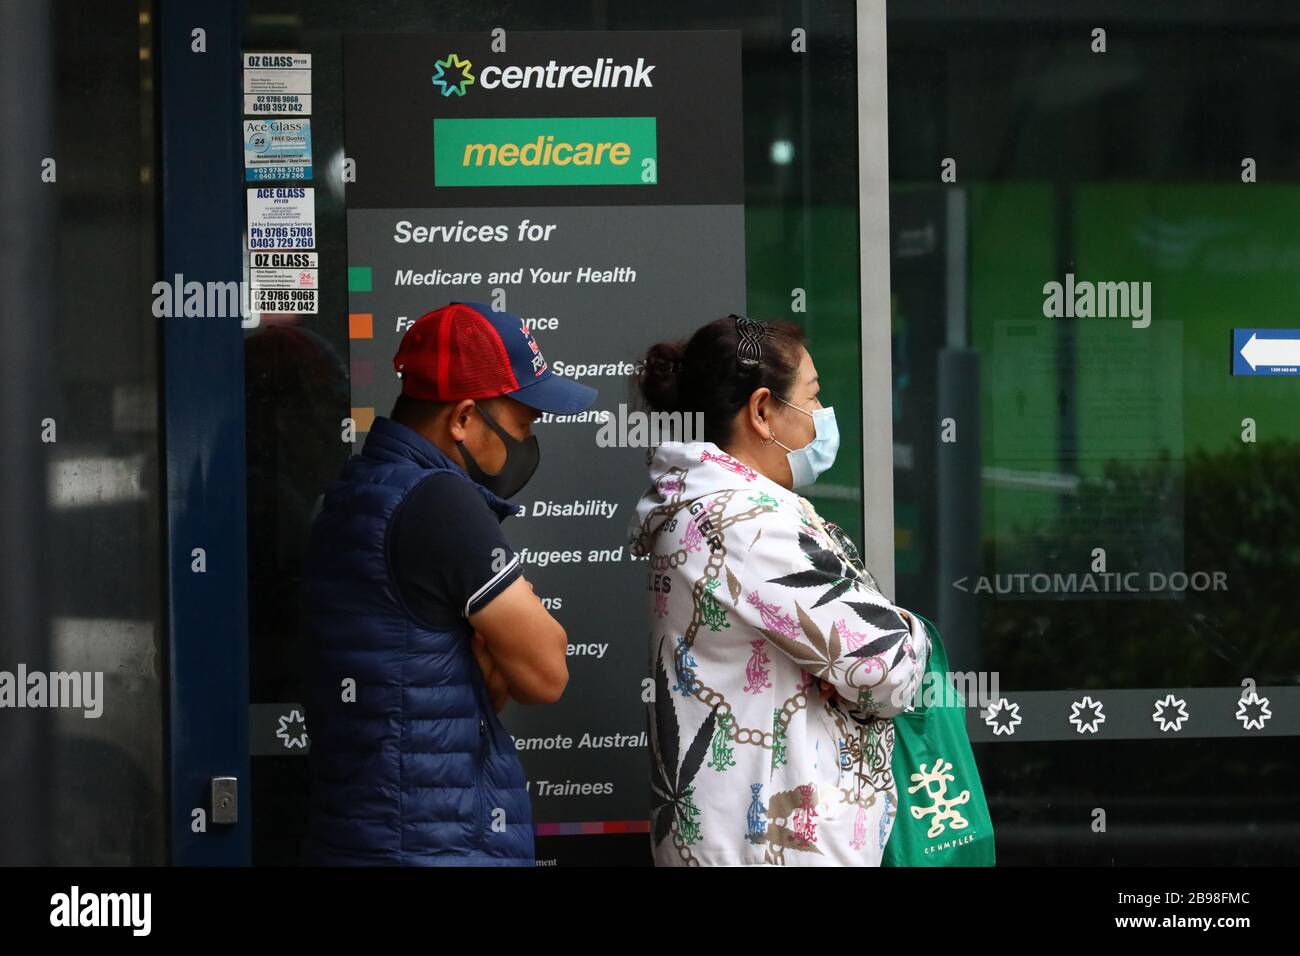 SYDNEY, AUSTRALIA, 24 Mar 2020, People line up to visit a Centrelink service centre in Burwood, Sydney, after job losses from coronavirus have prompted a surge in demand for unemployment payments. Credit: Sebastian Reategui/Alamy Live News Stock Photo